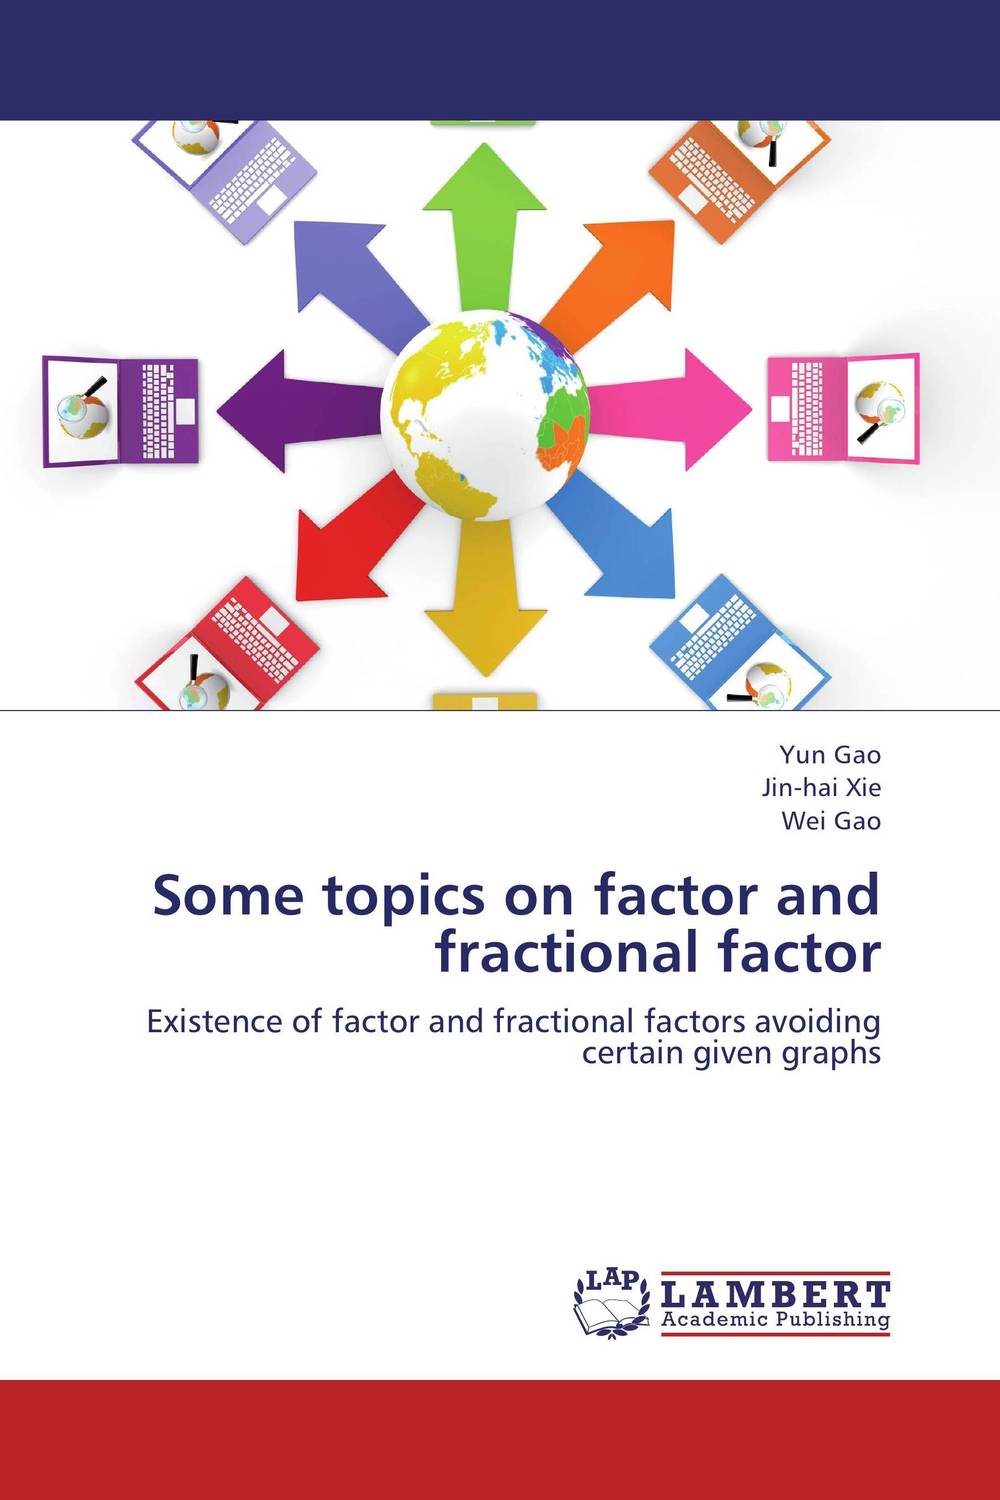 Some topics on factor and fractional factor